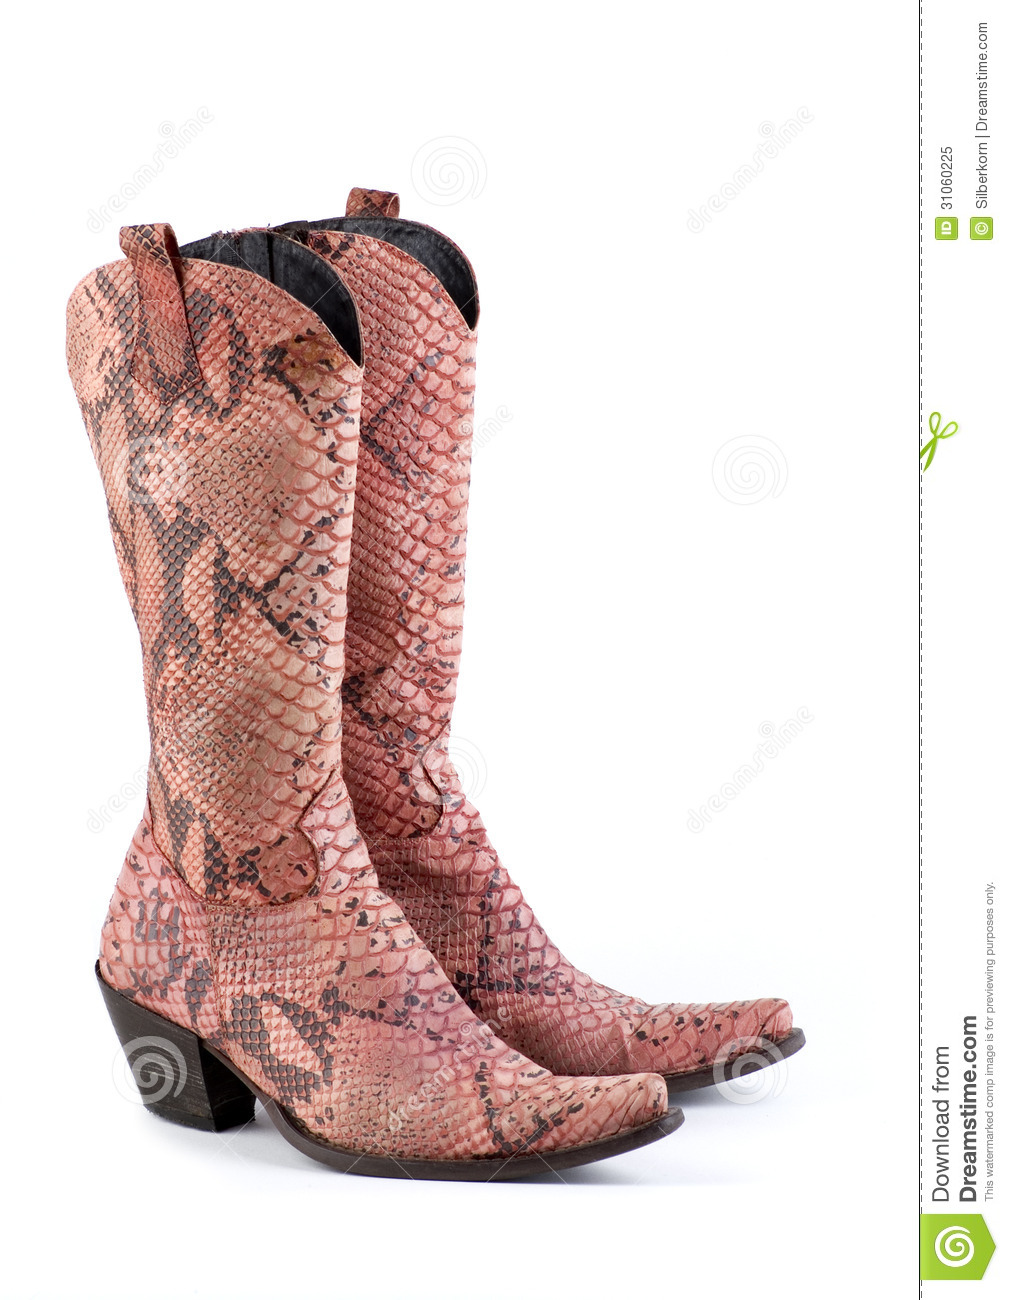 Pink Snake Leather Boots Royalty Free Stock Photo   Image  31060225